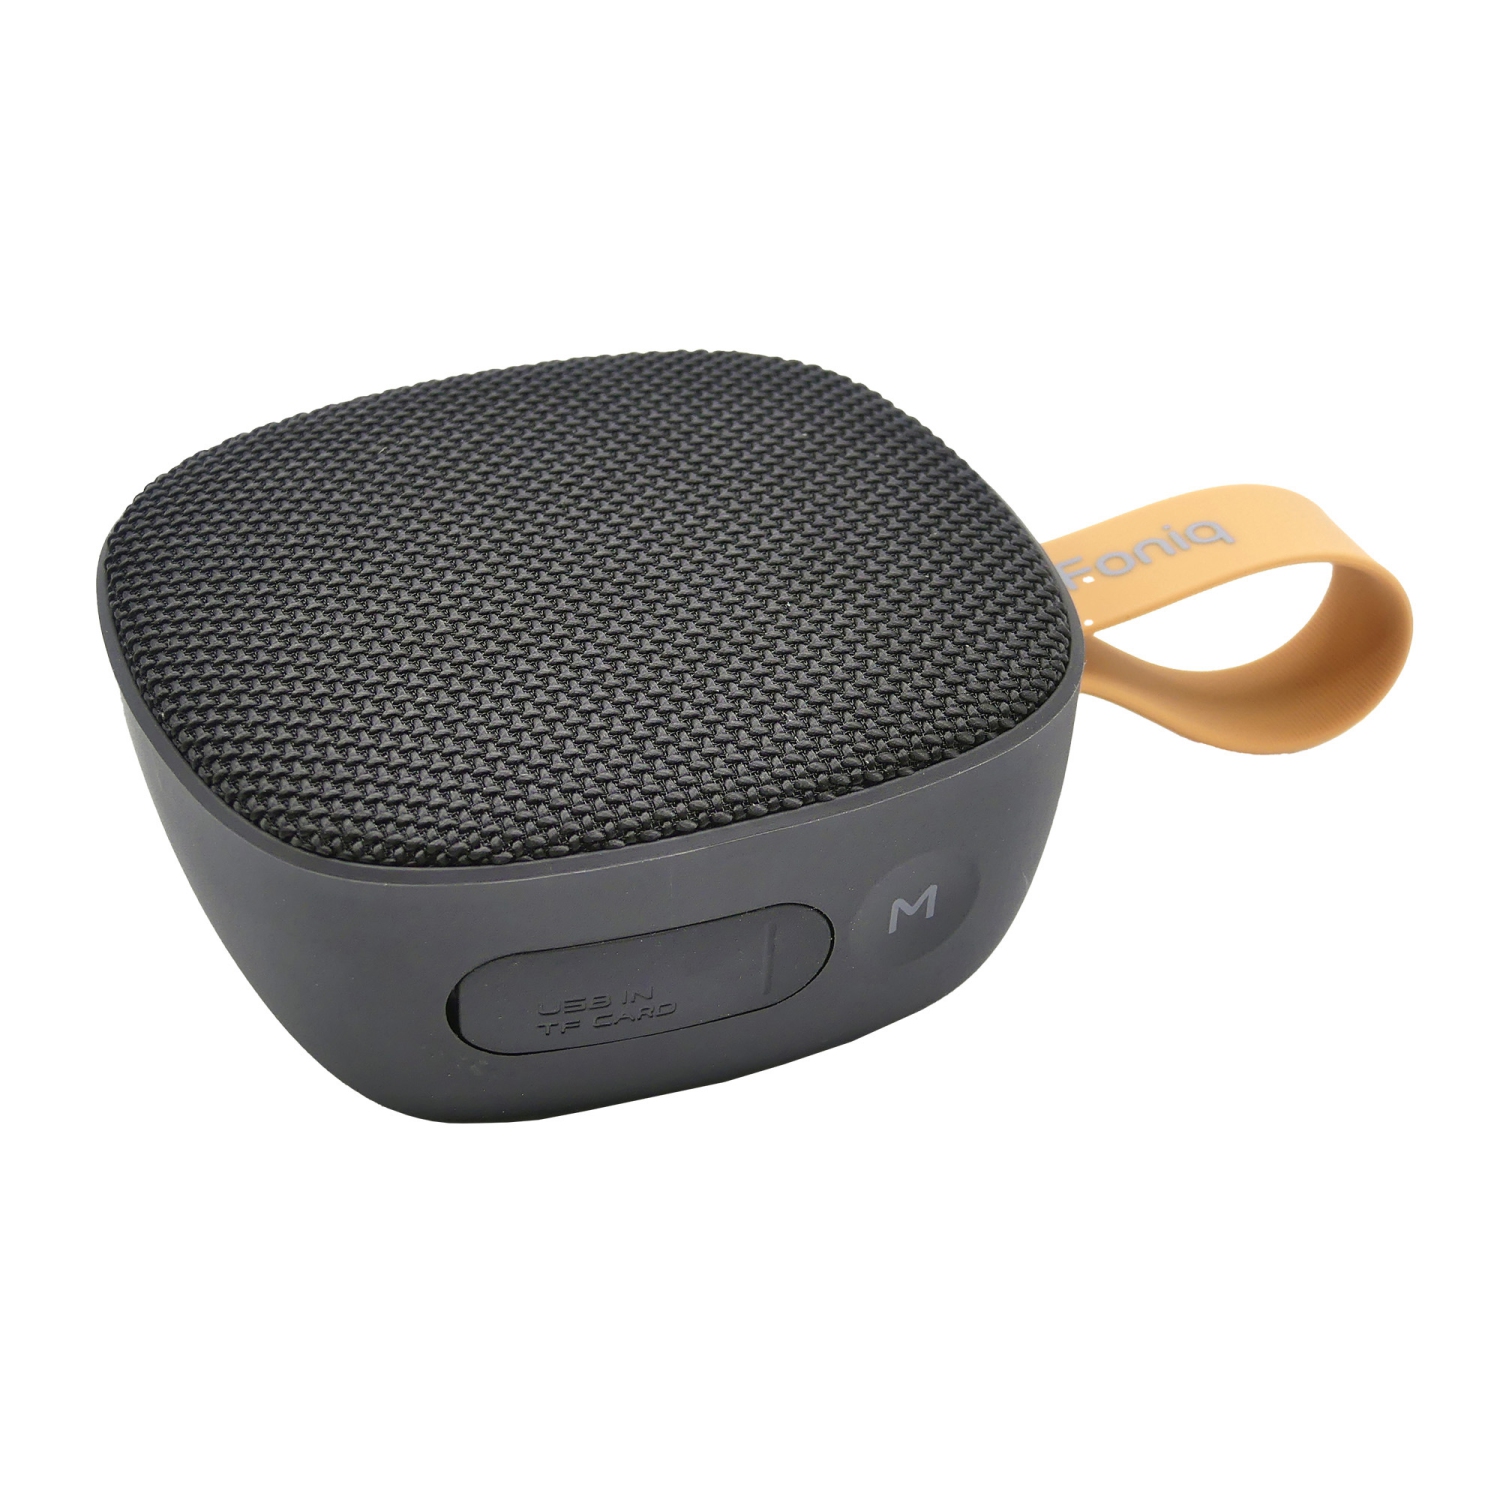 Foniq Solo Portable TWS Bluetooth Speaker with FM mode and SD card